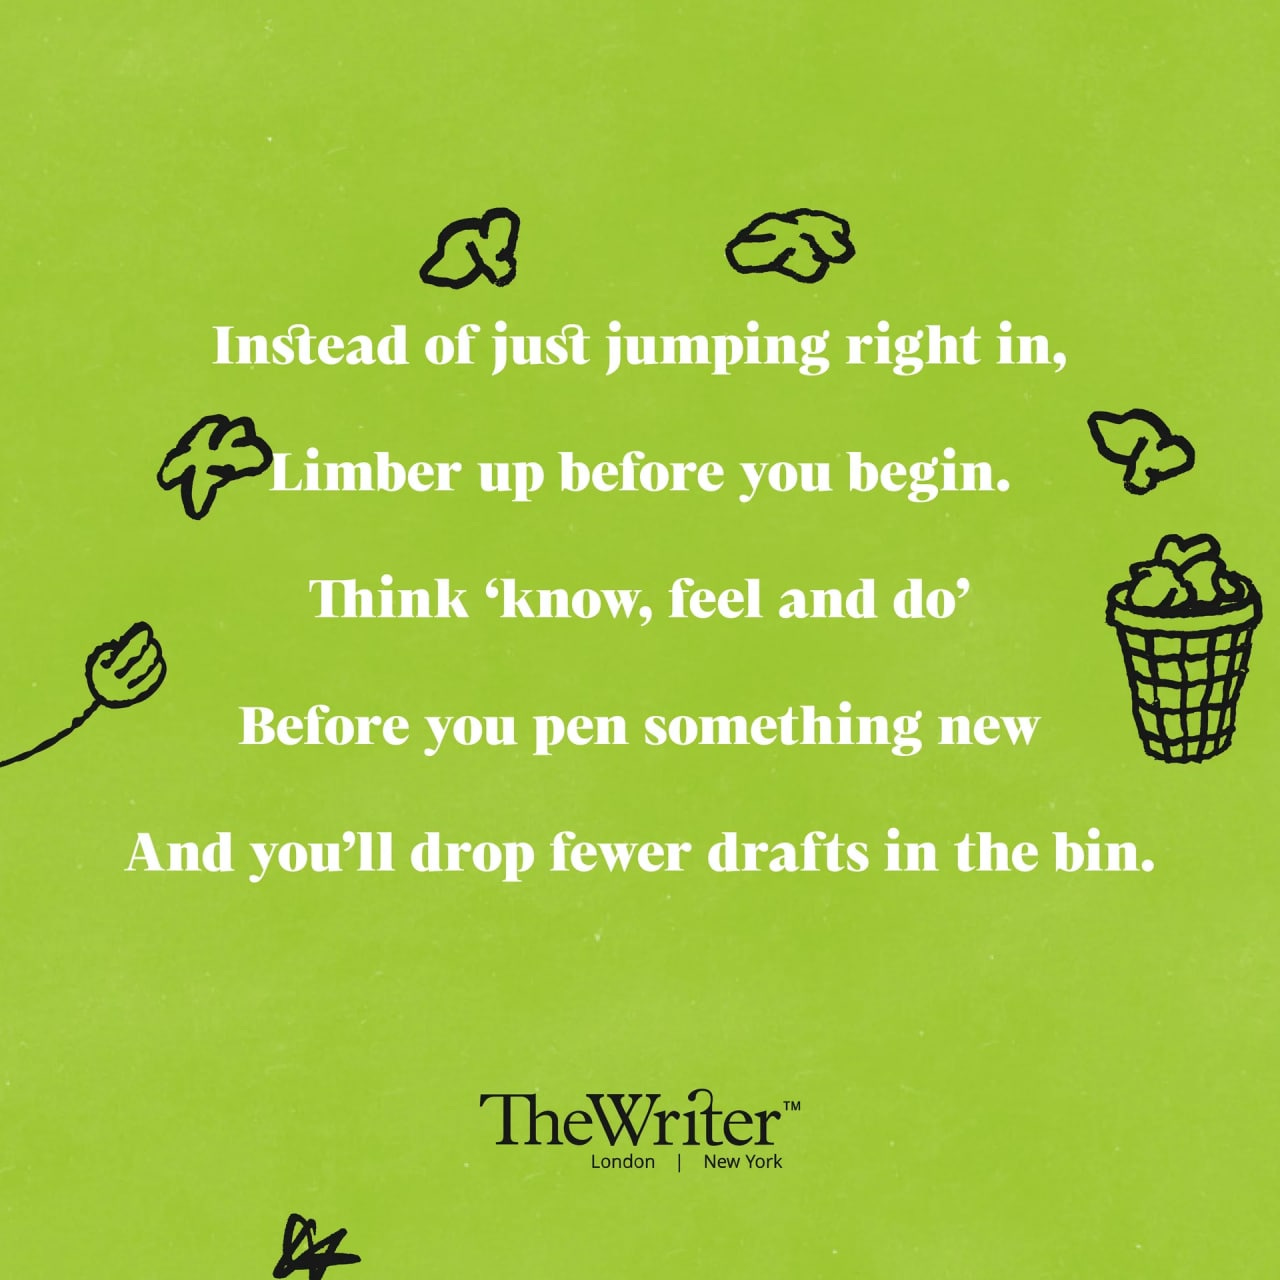 Instead of just jumping right in, Limber up before you begin. Think ‘Know, feel and do’ Before you pen something new And you’ll drop fewer drafts in the bin.